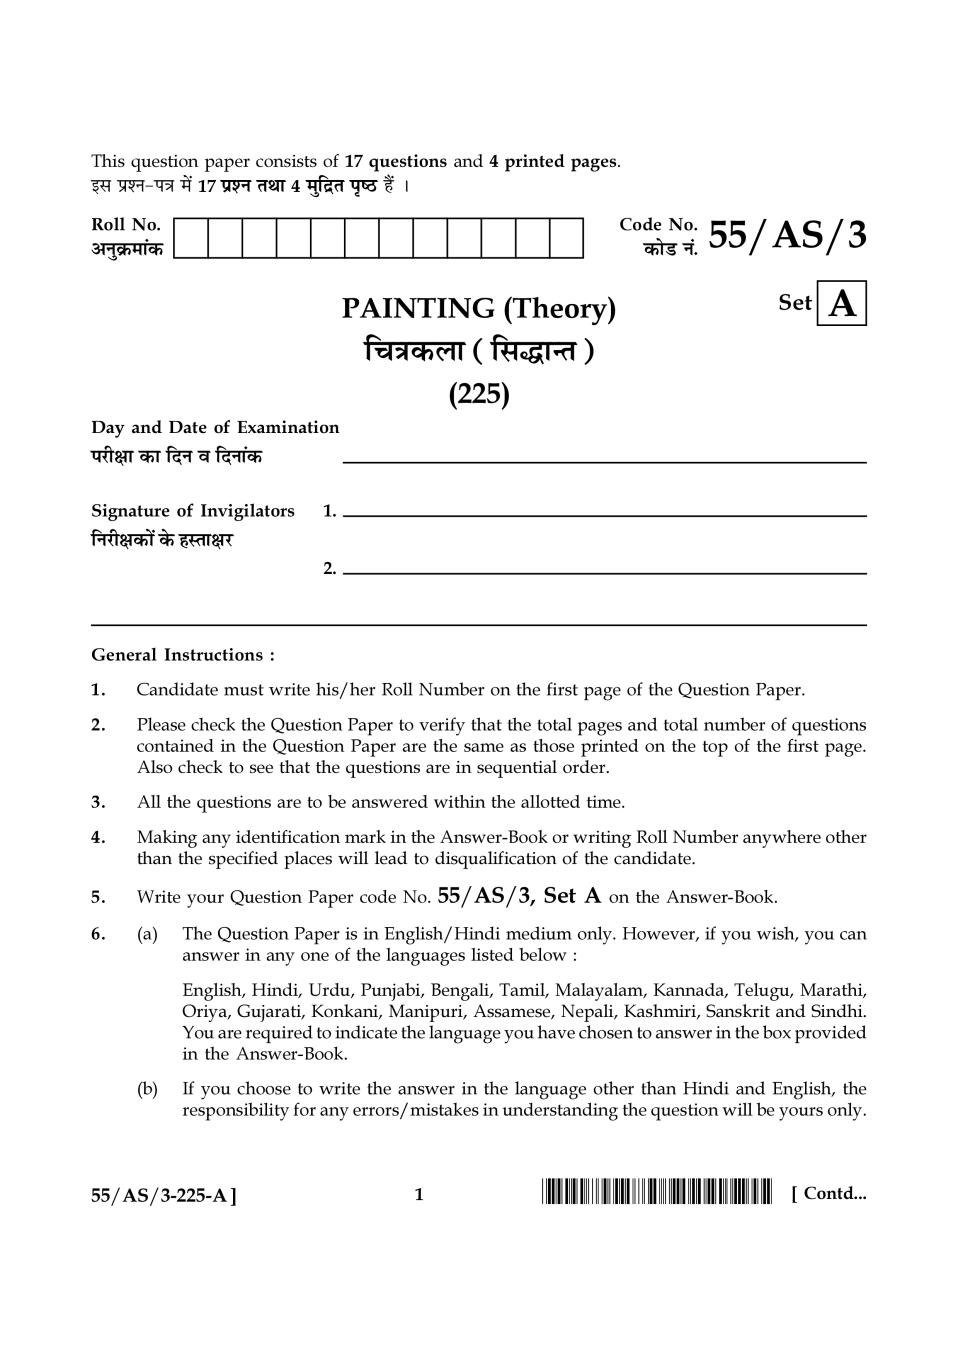 NIOS Class 10 Question Paper Oct 2017 - Painting Theory - Page 1